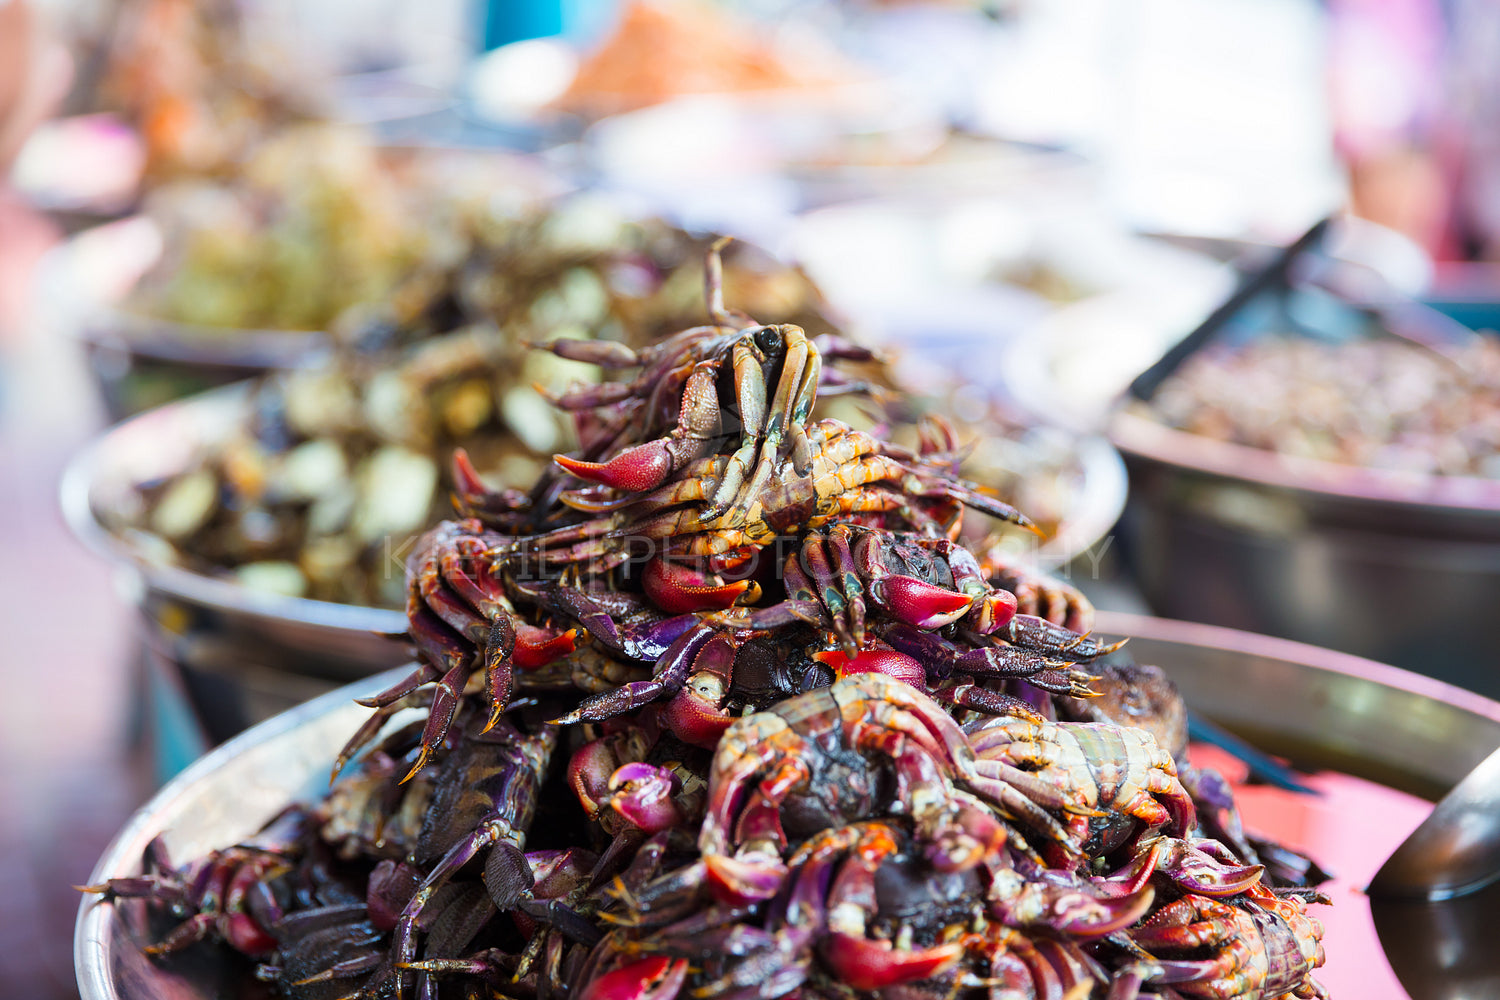 Pickled Crabs For Sale At Local Thai Street Market